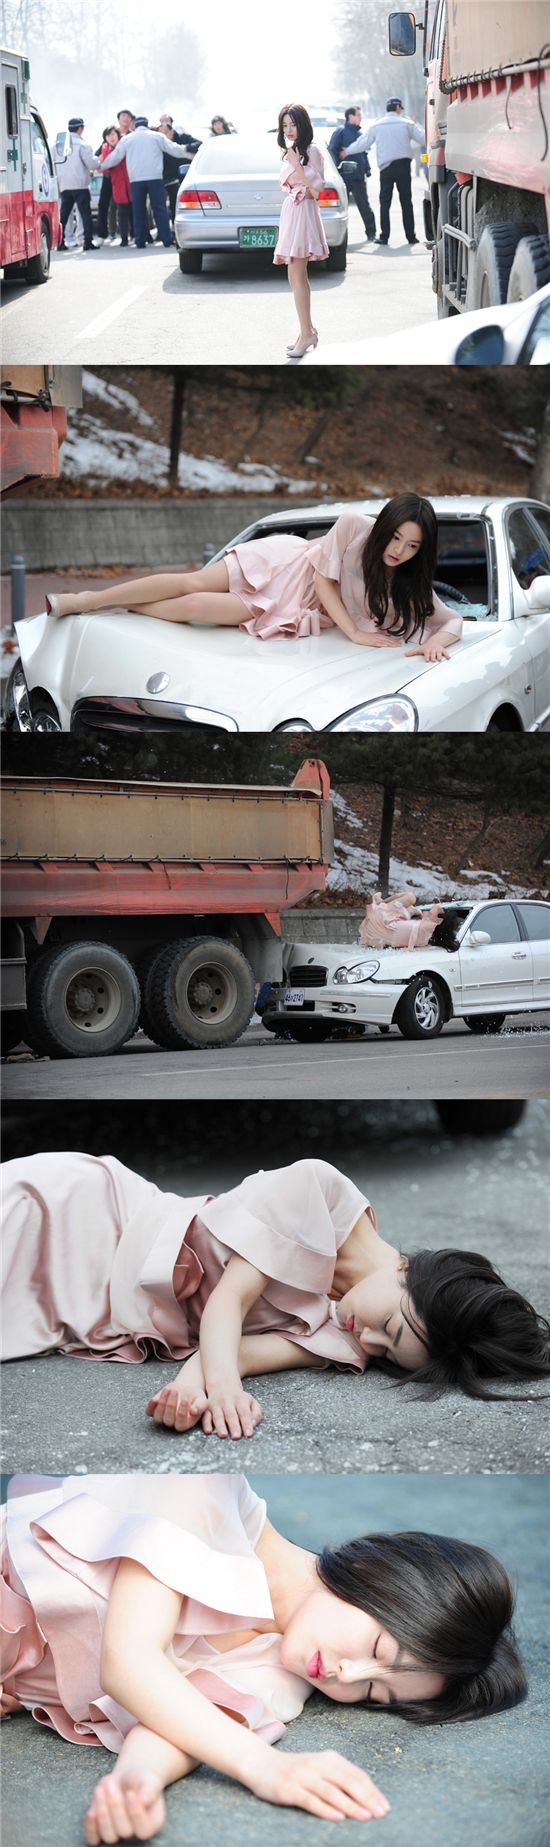 [KD] The 100 million won accident scene from the set of ’49 49-days-2nd-march-news